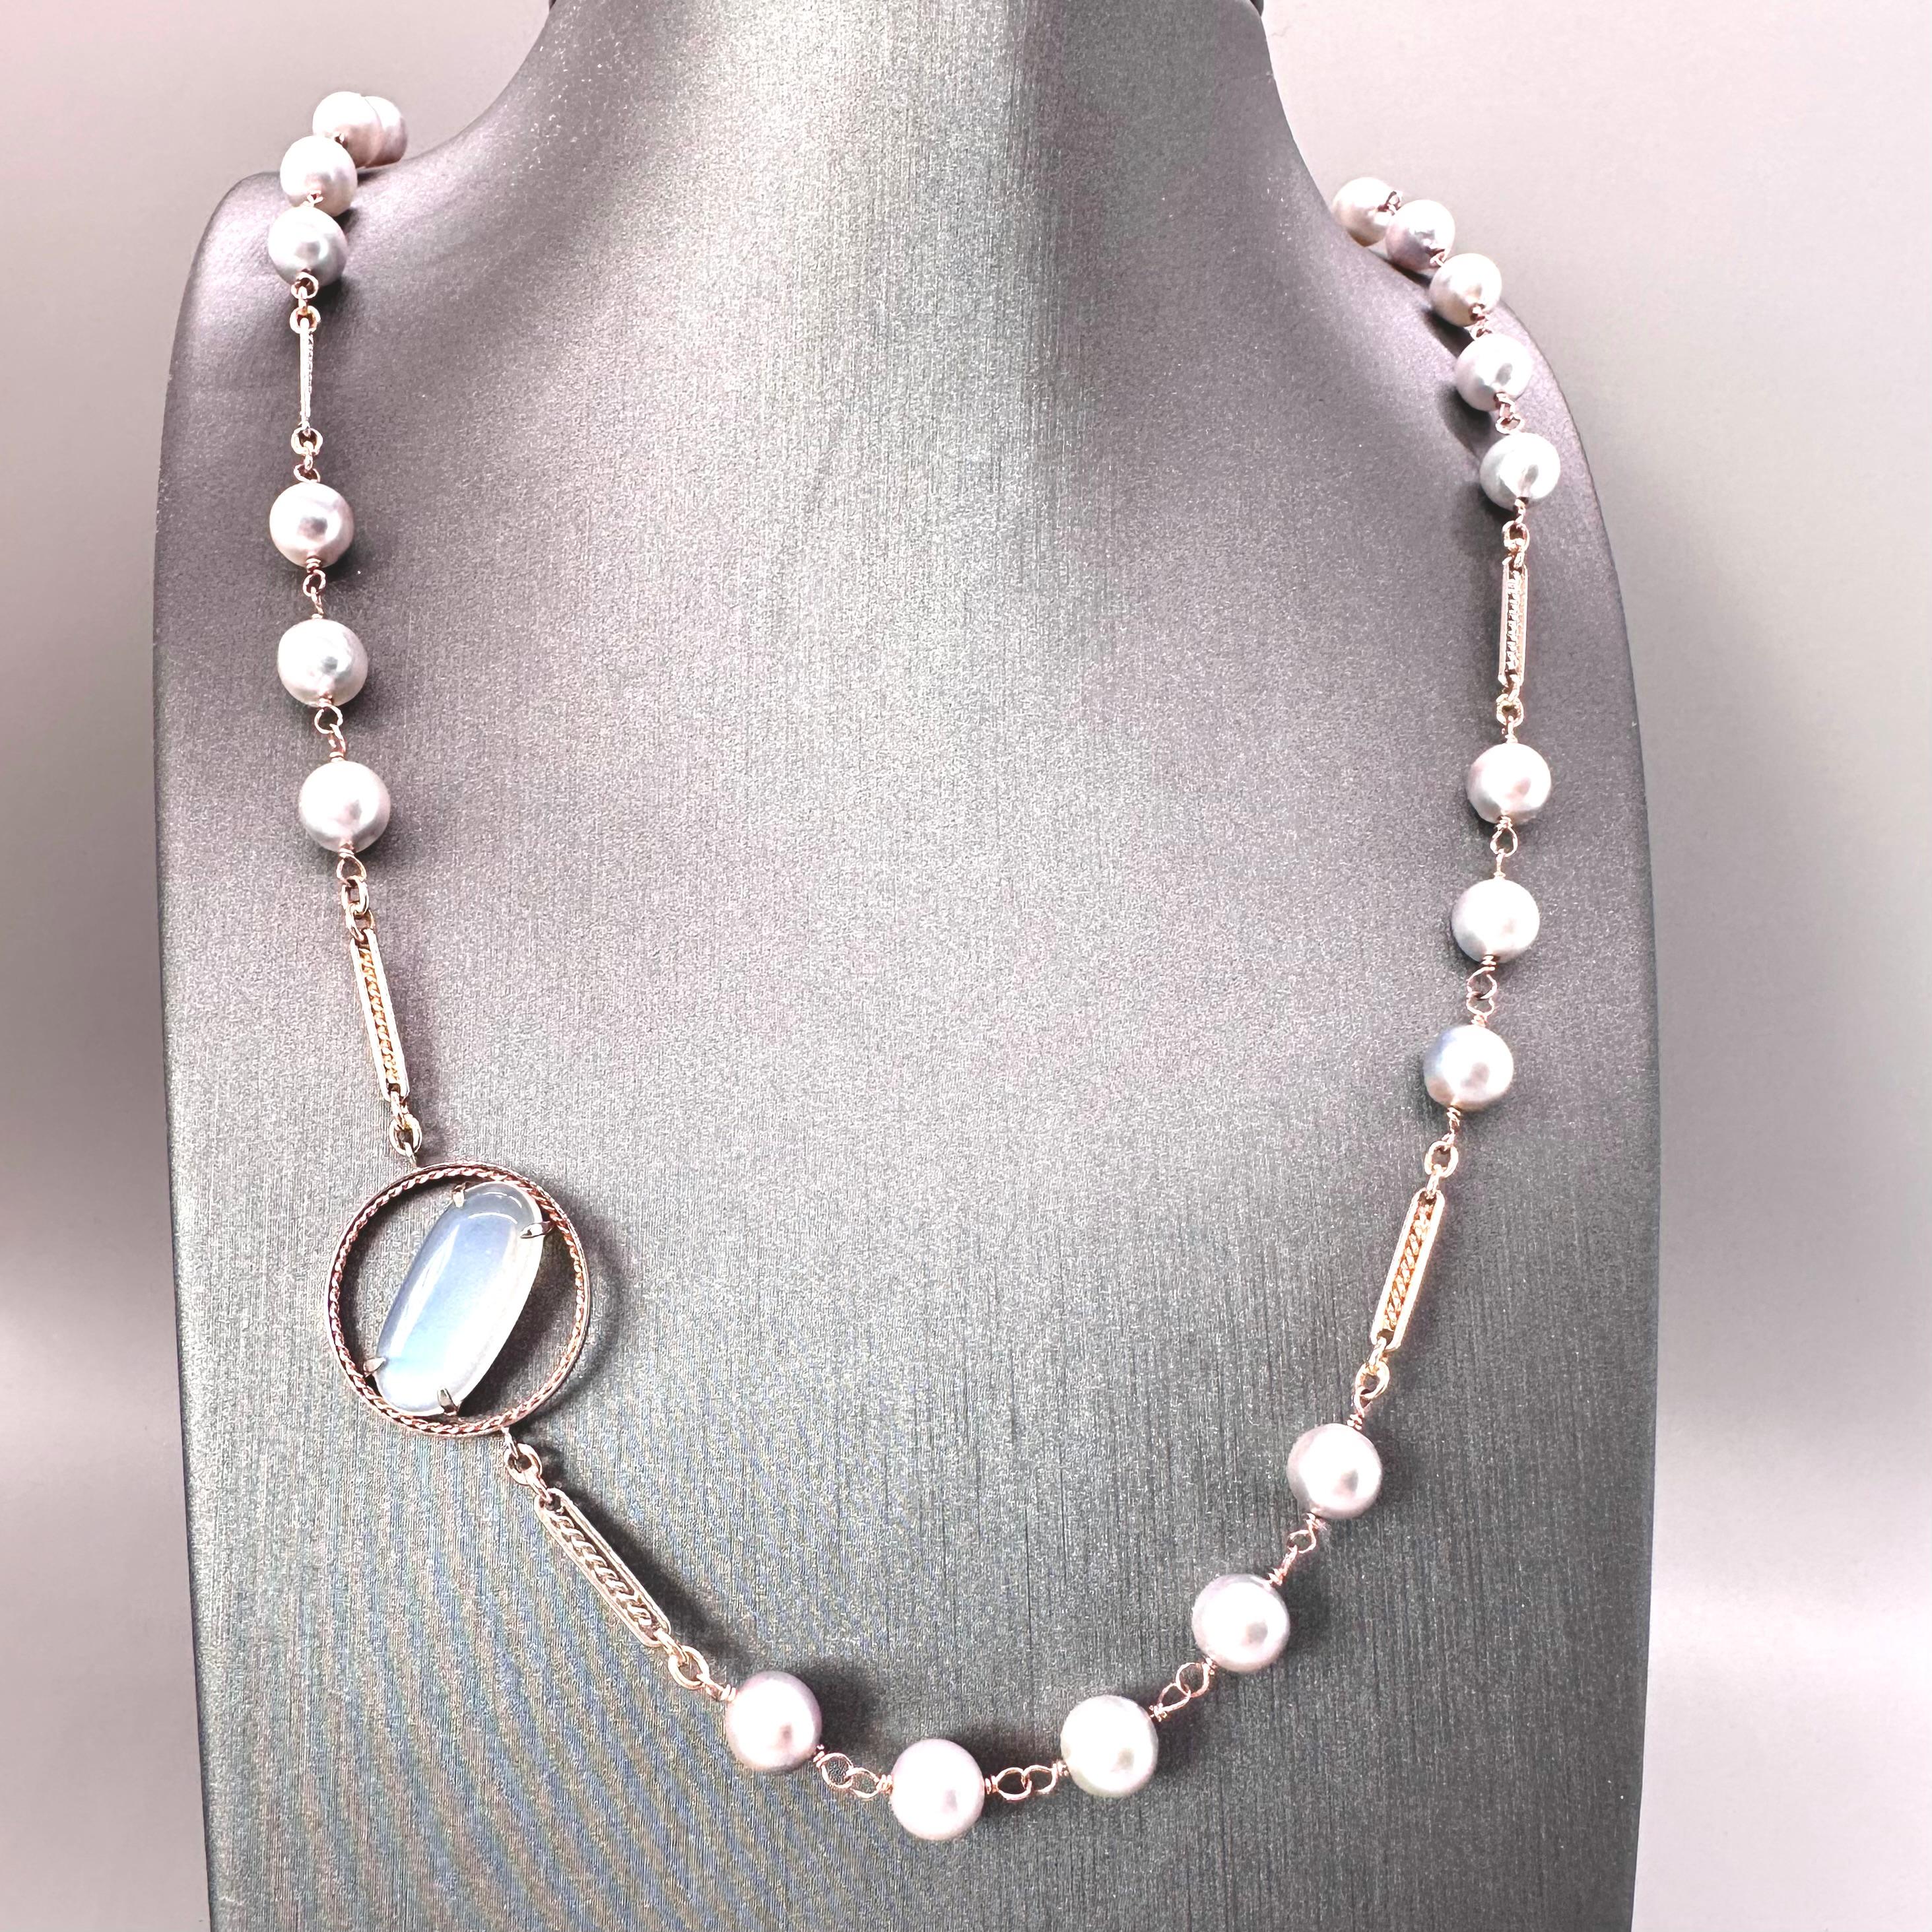 6.61 carat blue moonstone, Akoya pearls on a handmade 14k necklace by G&G Studio For Sale 8